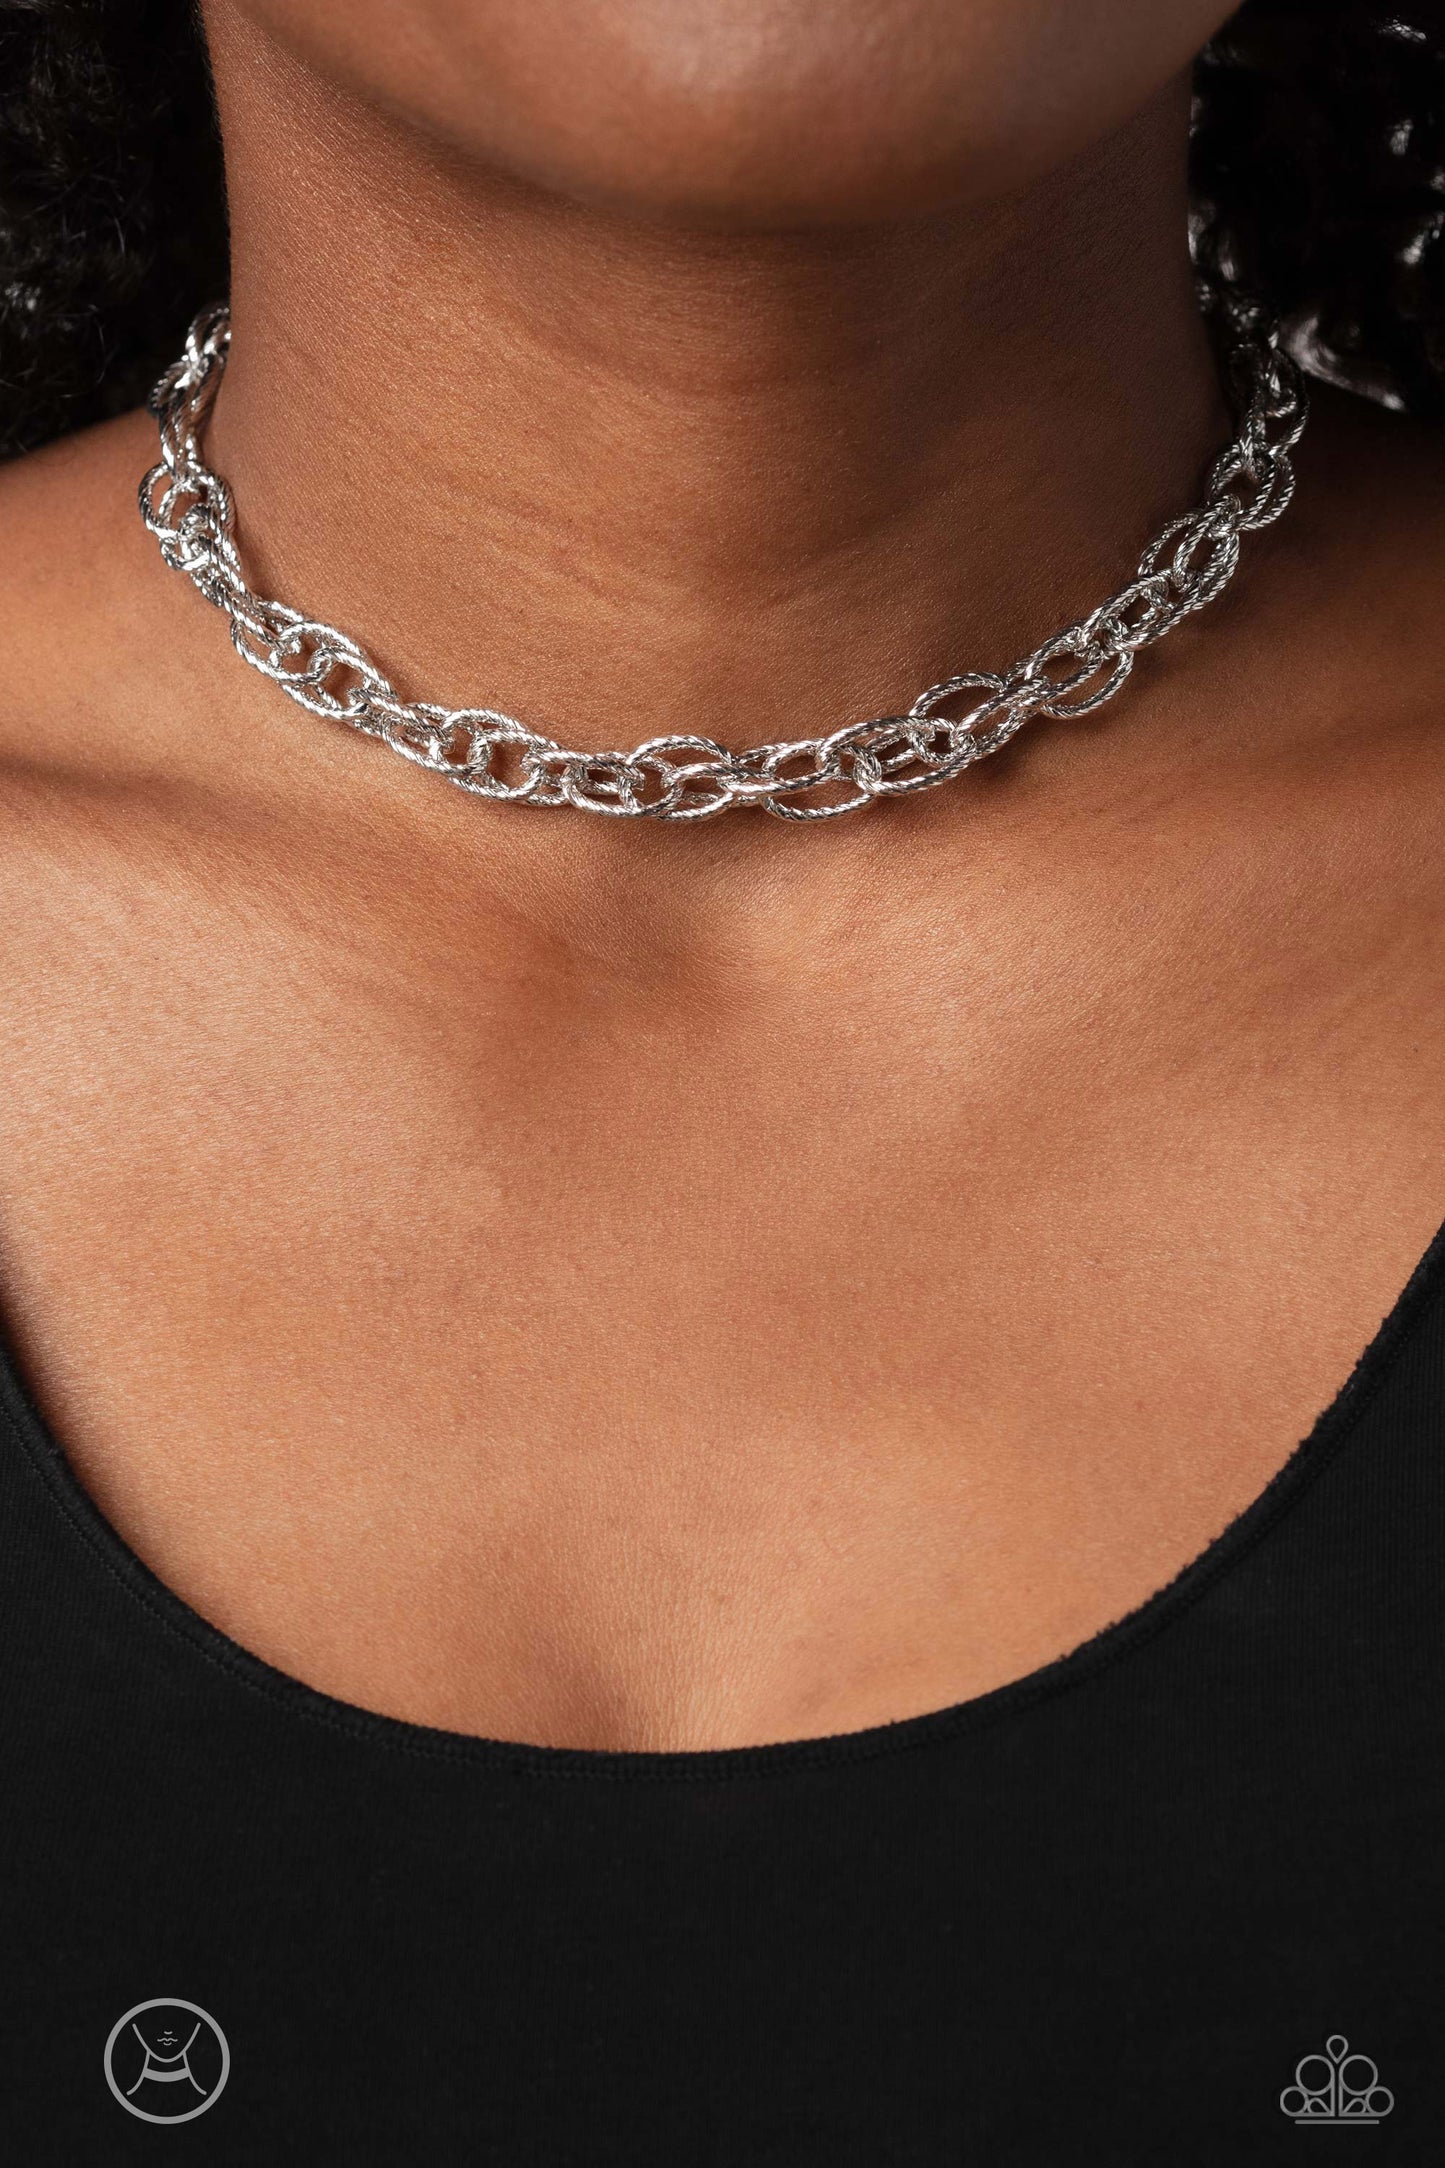 If I Only Had a CHAIN - Silver Paparazzi Necklace